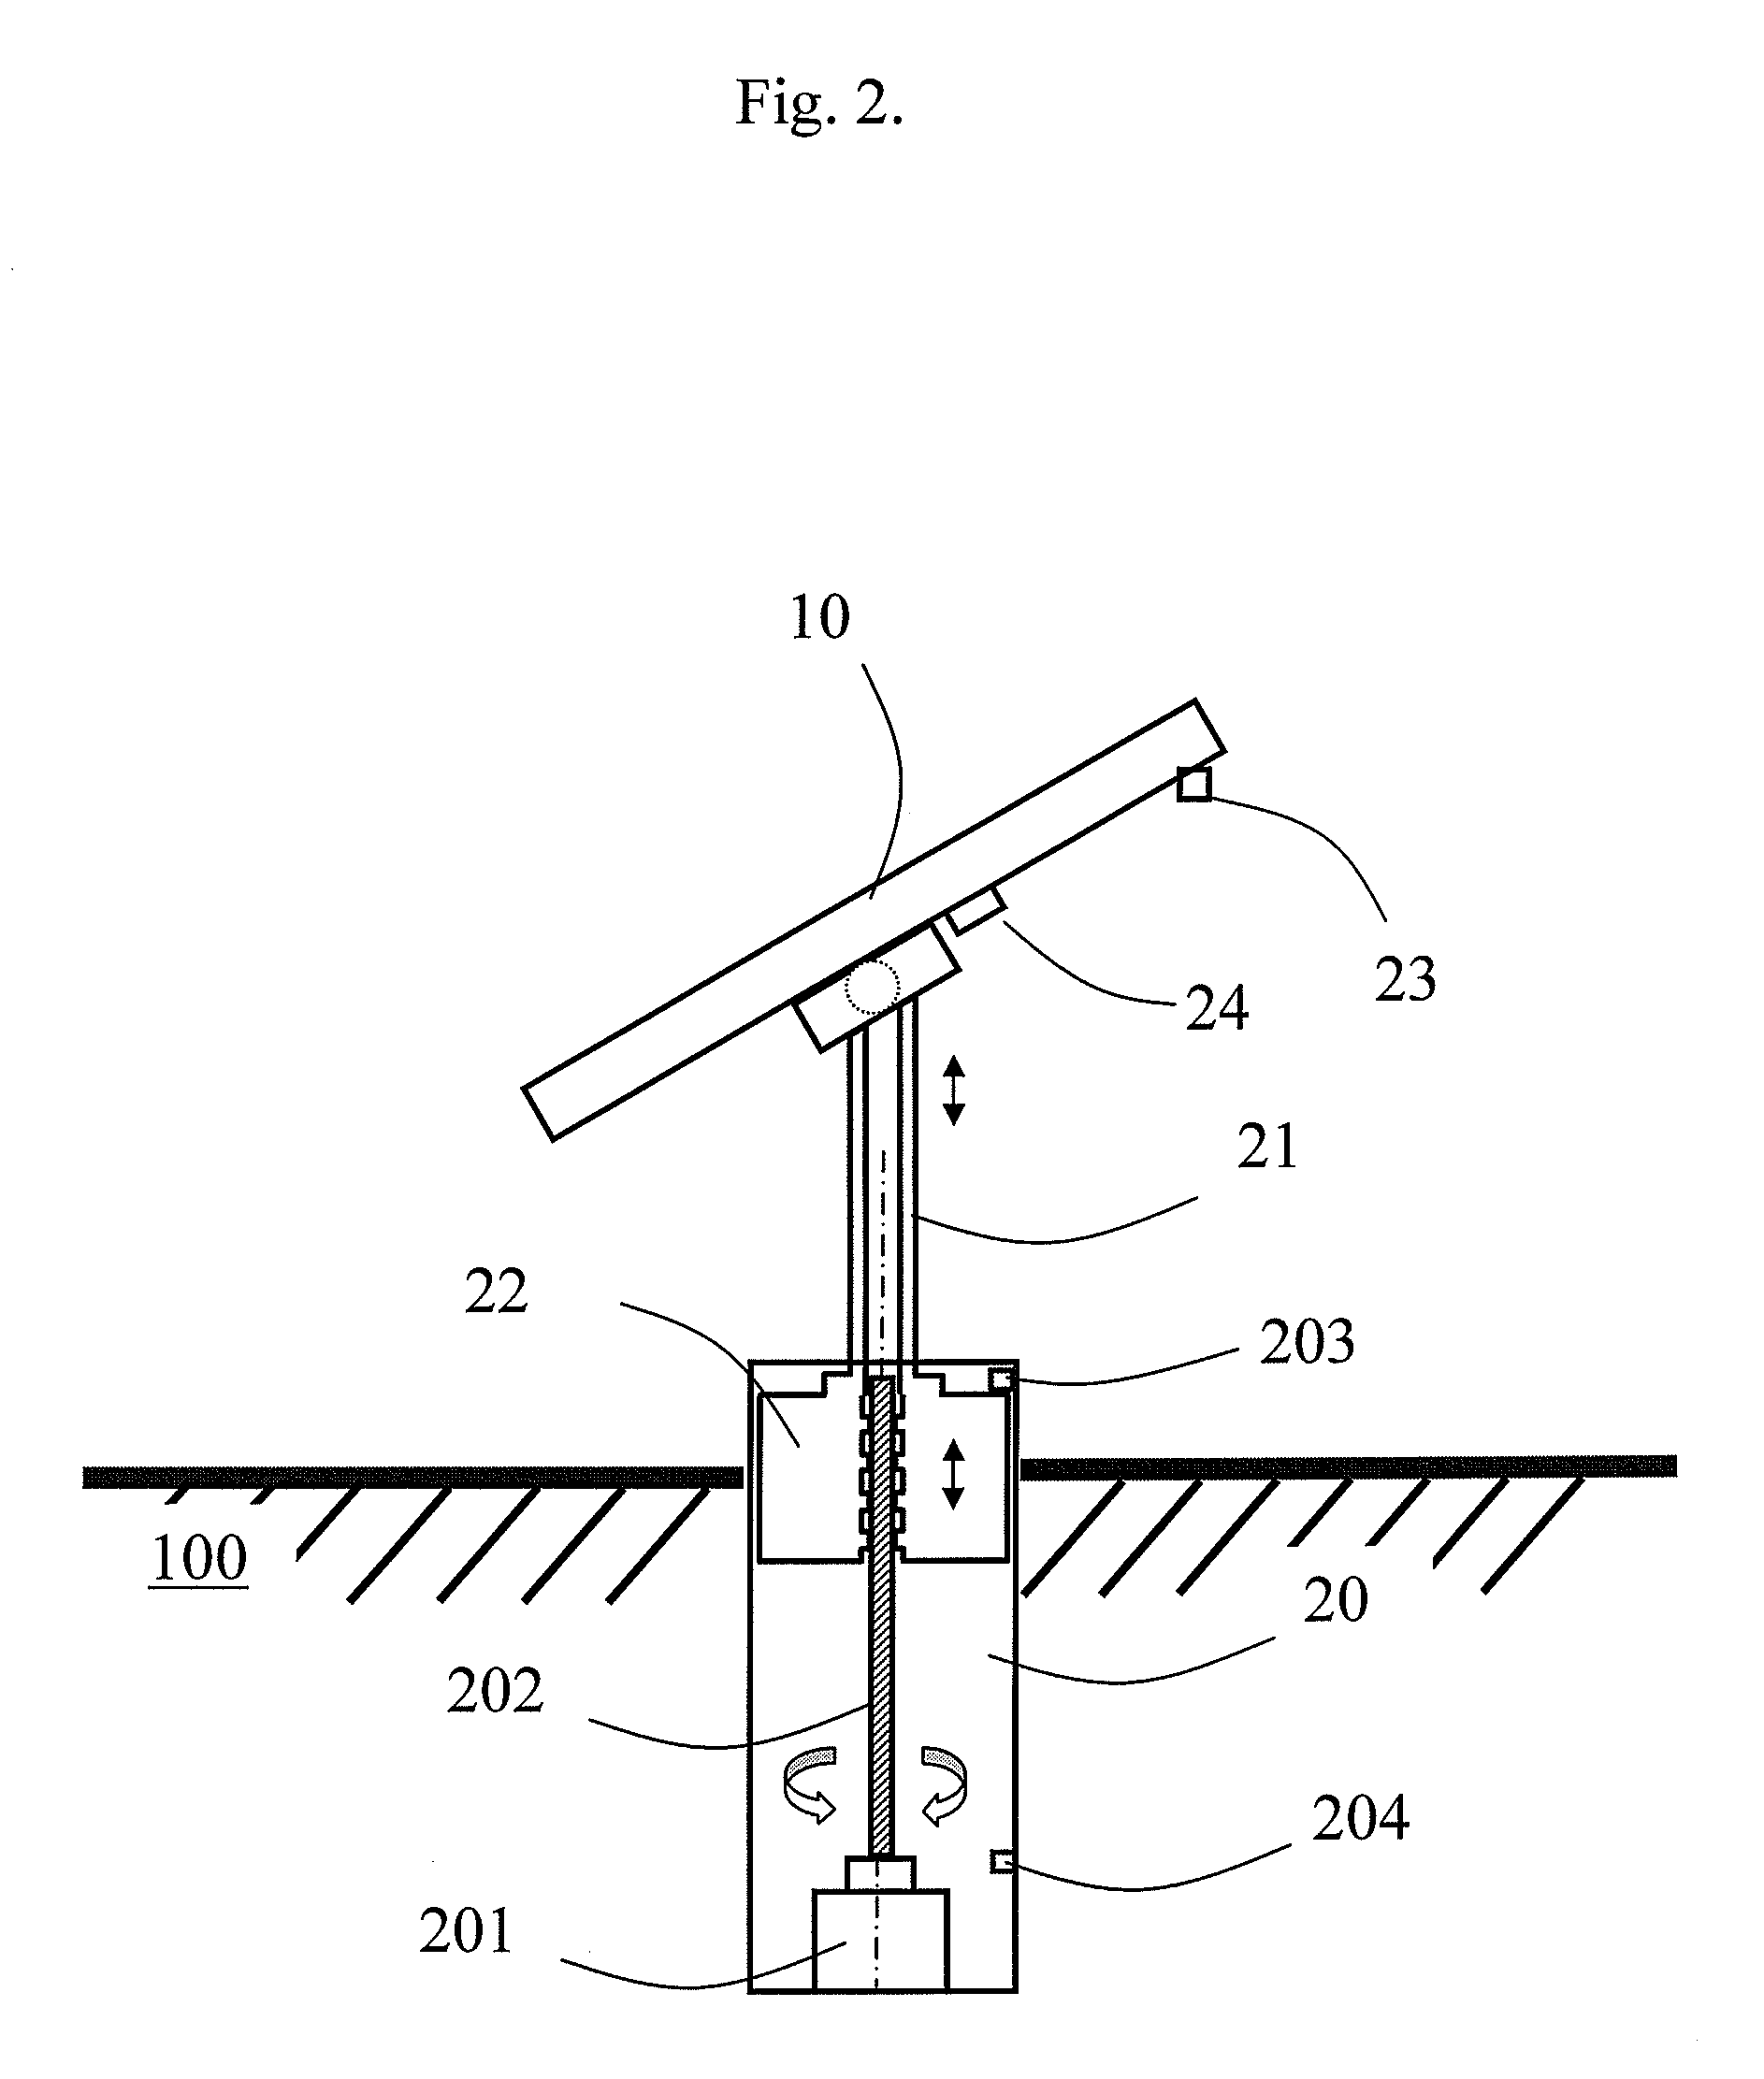 Strong wind protection system for a solar panel